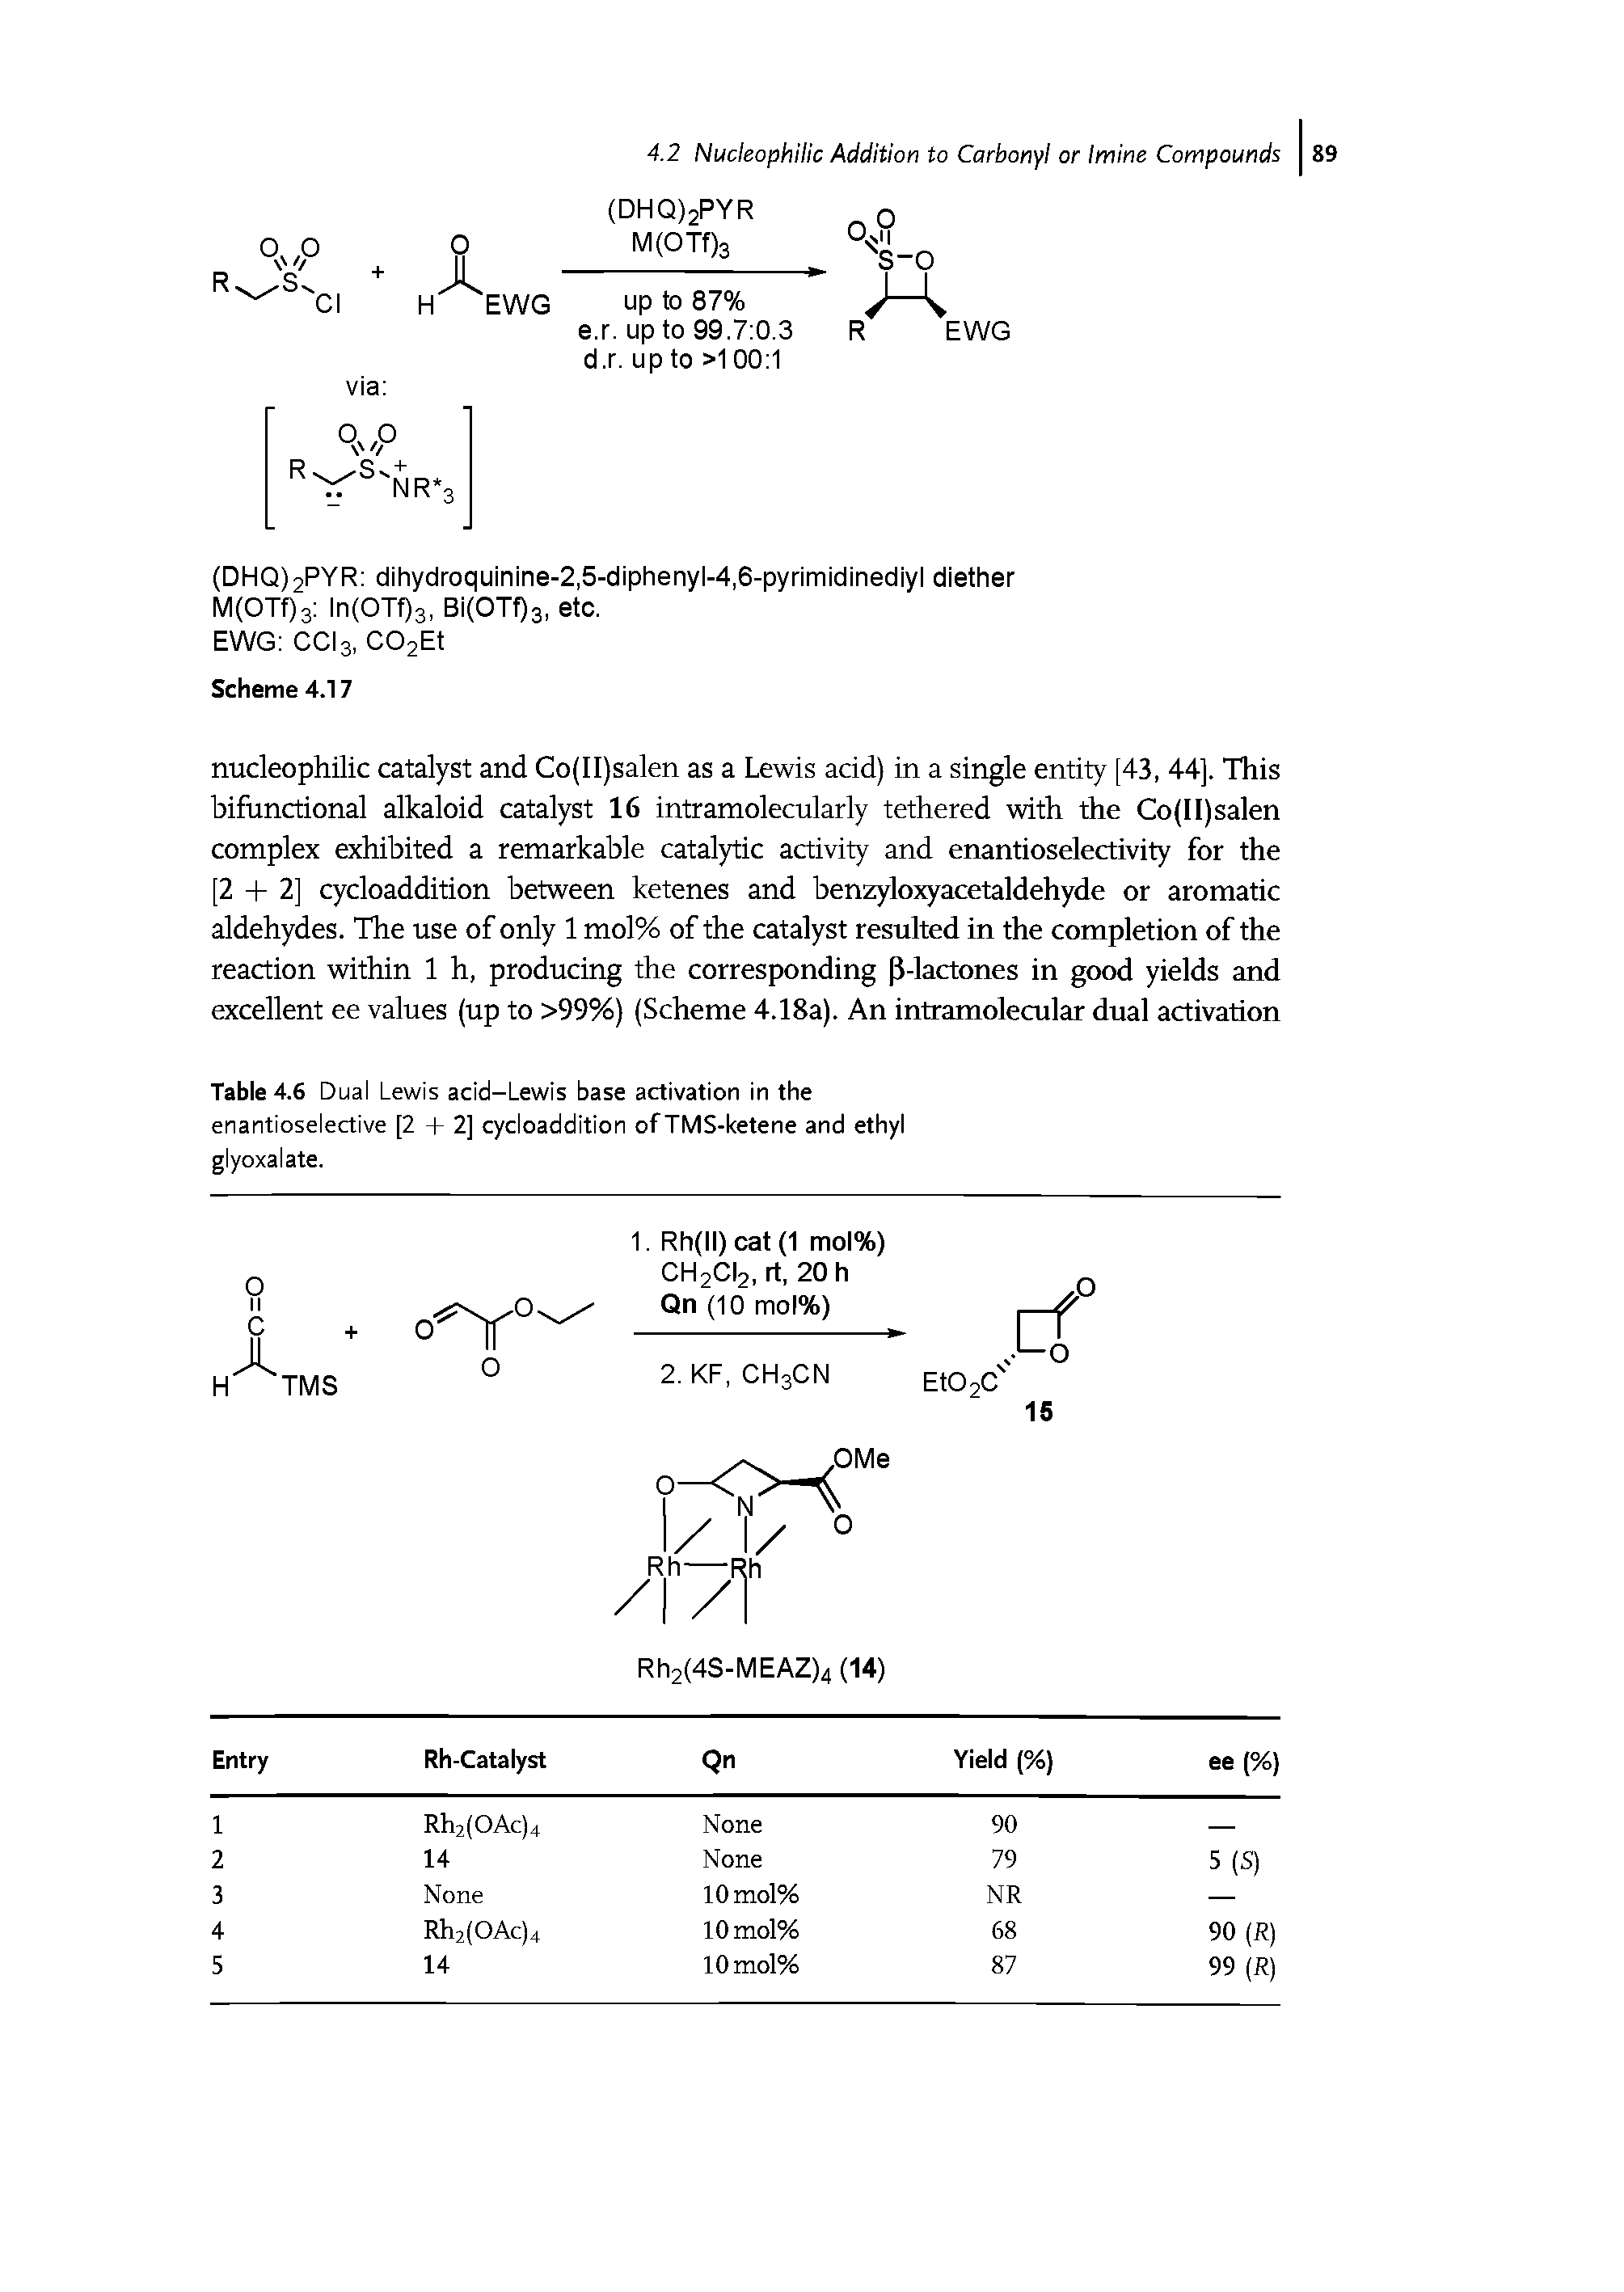 Table 4.6 D ual Lewis acid-Lewis base activation in the enantioselective [2 + 2] cycloaddition of TMS-ketene and ethyl glyoxalate.